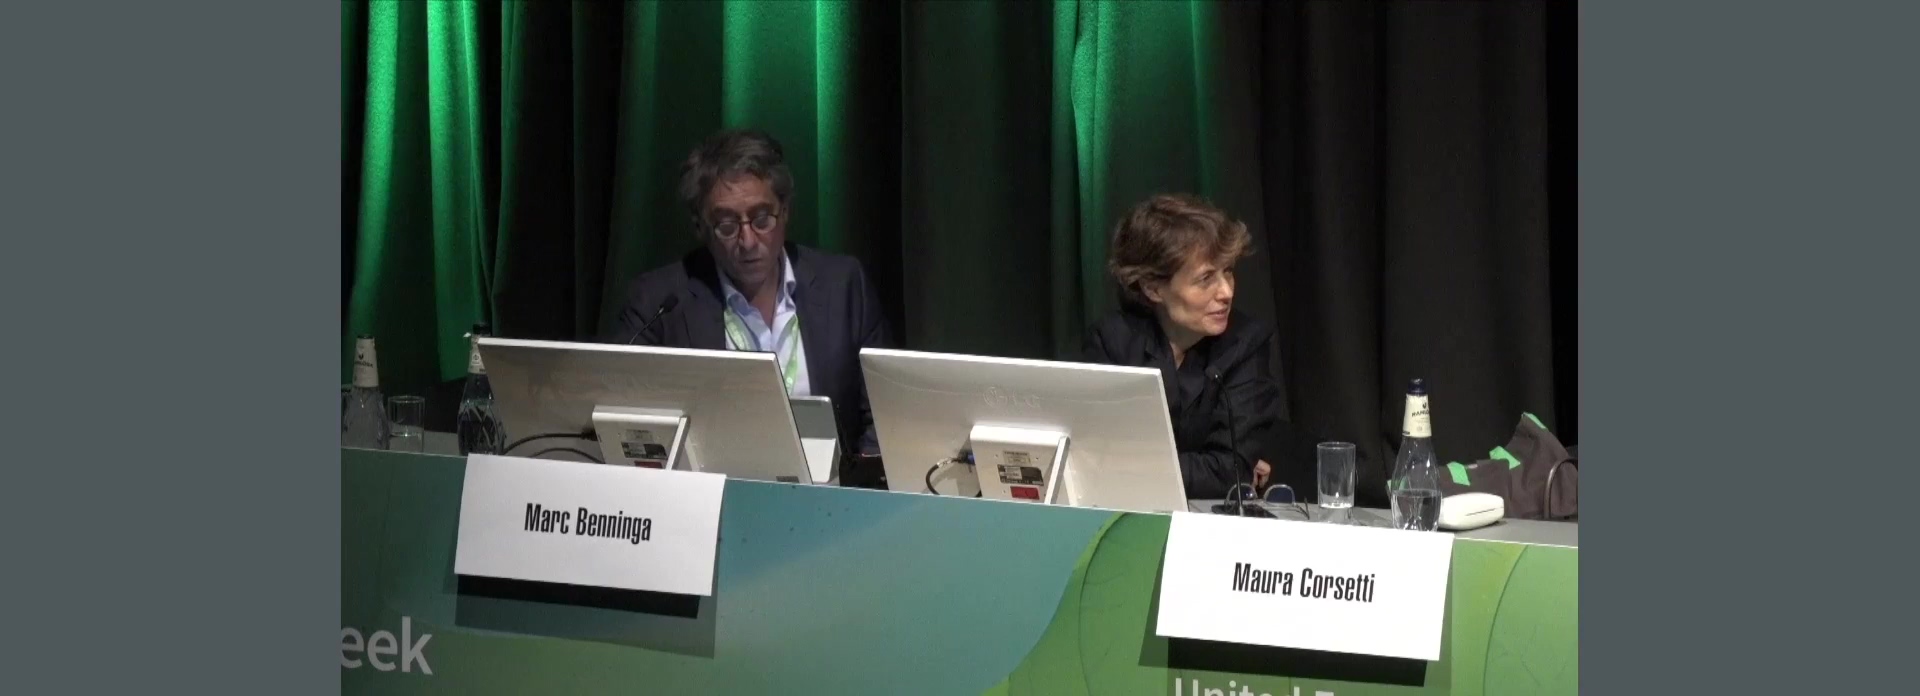 Panel discussion: Refractory constipation - Is there light at the end of the tunnel?